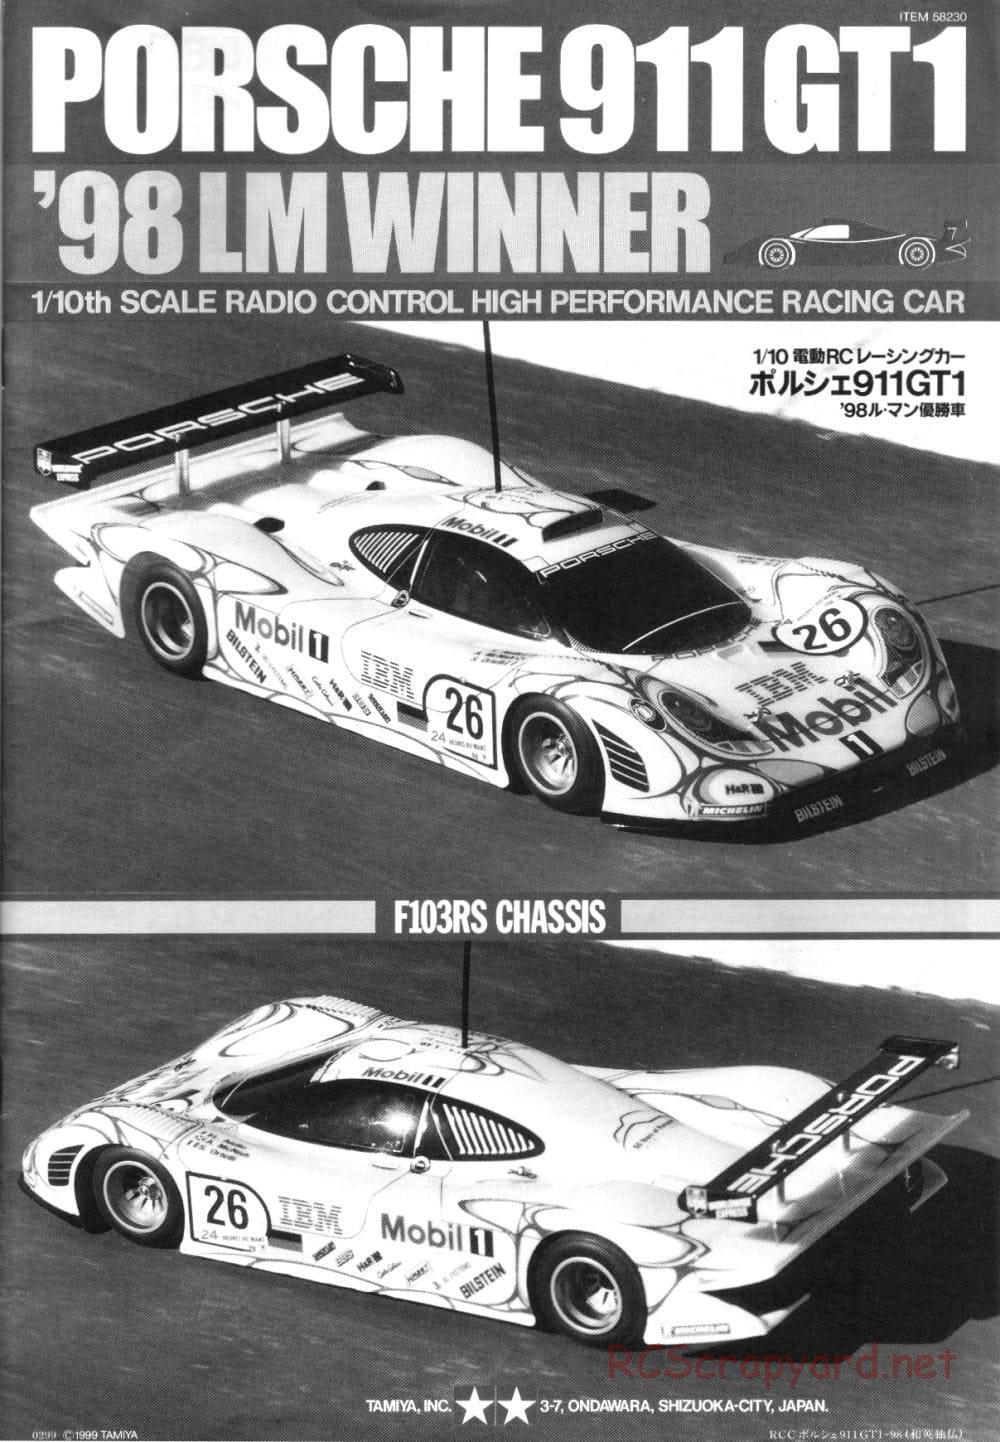 Tamiya - Porsche 911 GT1 98 LM Winner - F103RS Chassis - Manual - Page 1